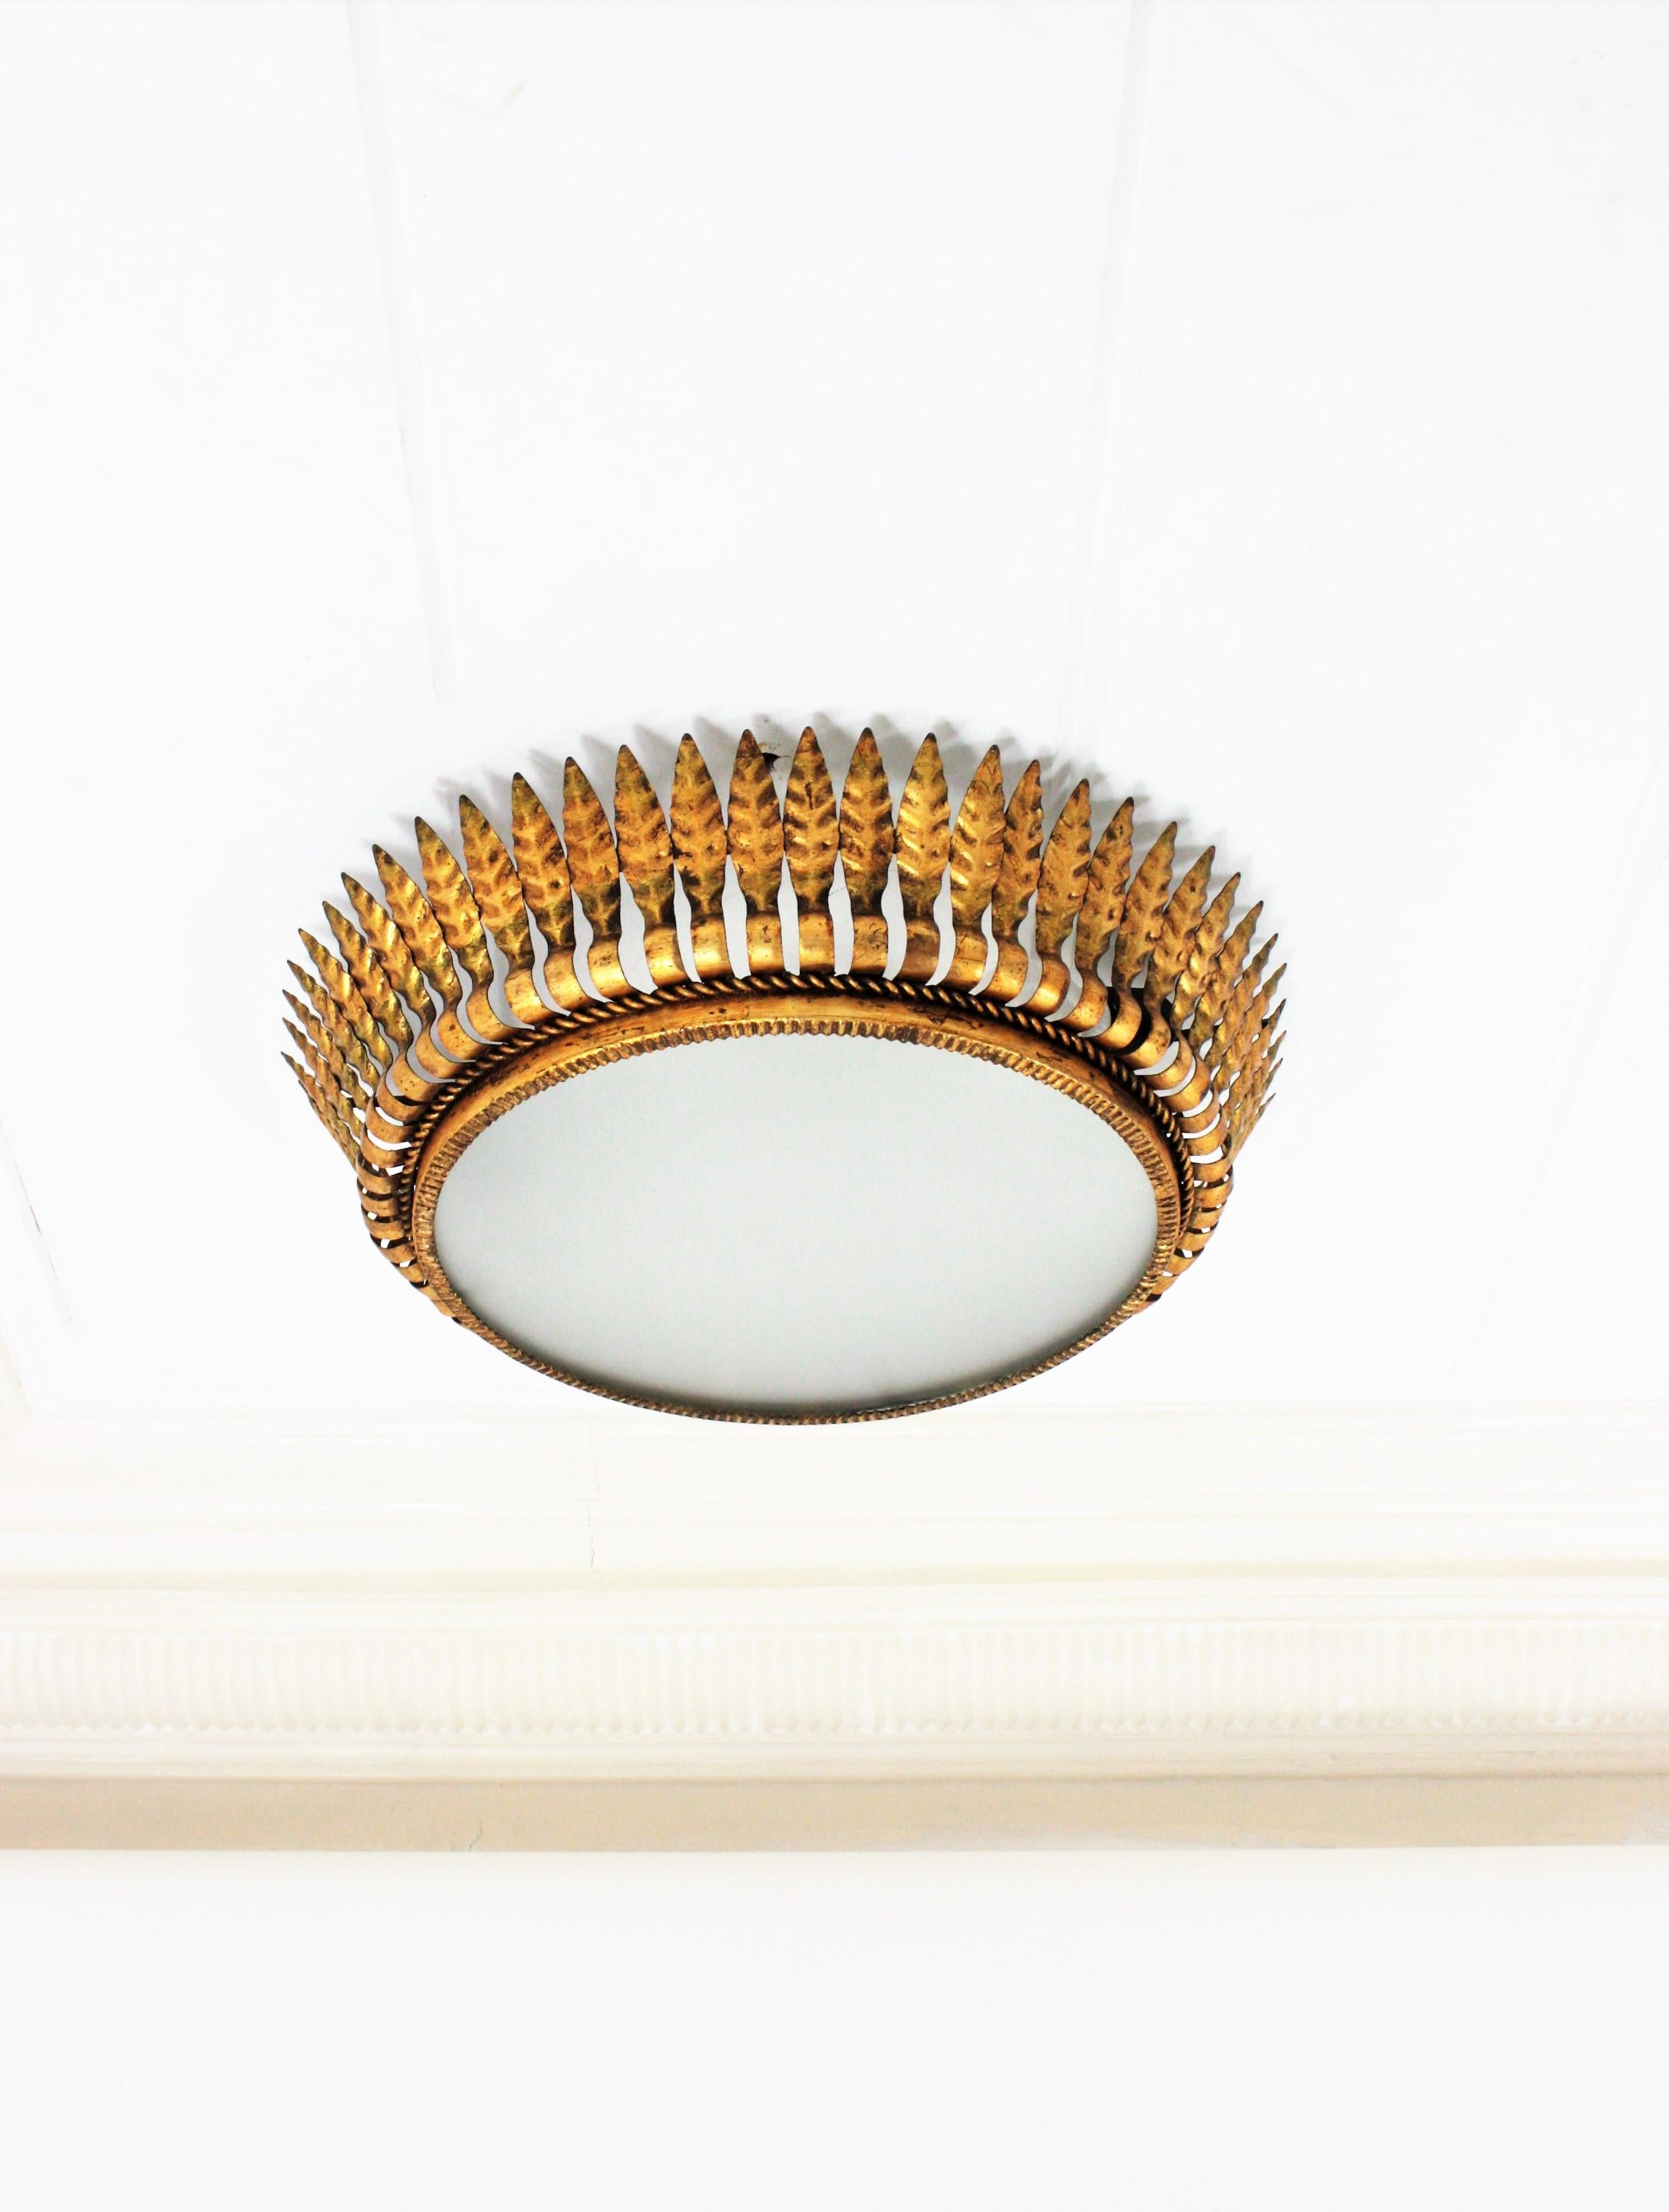 Midcentury Crown Sunburst Large Flush Mount (54 cm ), Gilt Iron, Frosted Glass, Spain, 1950s.
This sunburst flushmount or pendant has leaf motifs surrounding a central frosted glass diffuser and a twisted iron rope surrounding the